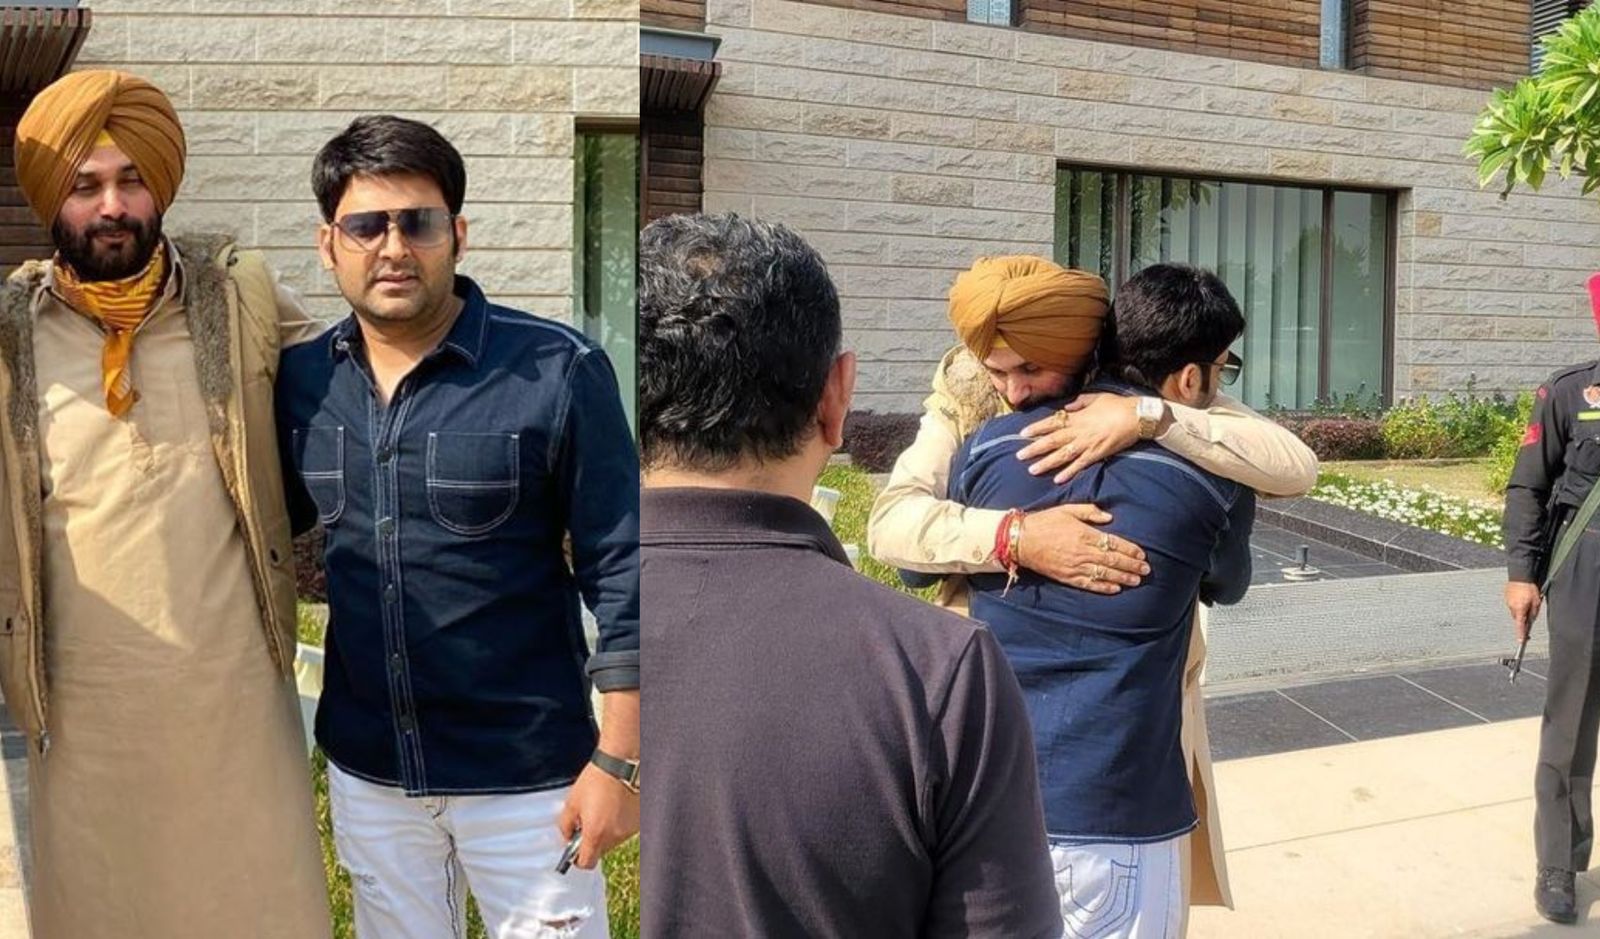 Kapil Sharma Shares Pictures From His Reunion With Navjot Singh Sidhu, The Two Share A Warm Hug & Enjoy Paranthas